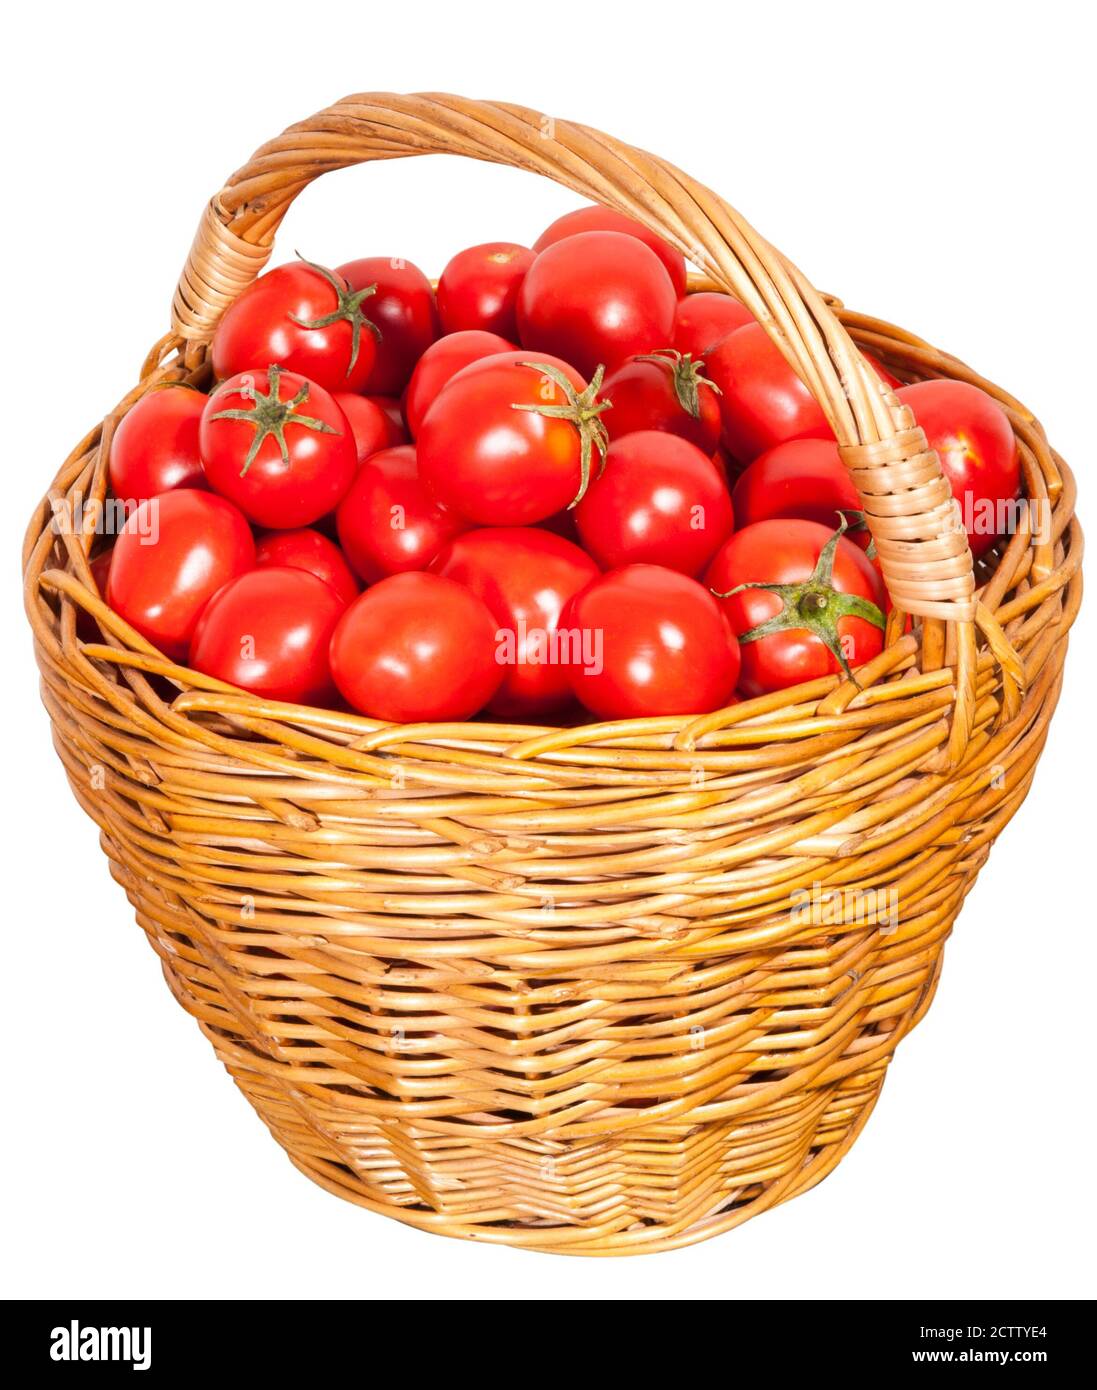 Tomatoes in a basket on a white background Stock Photo - Alamy